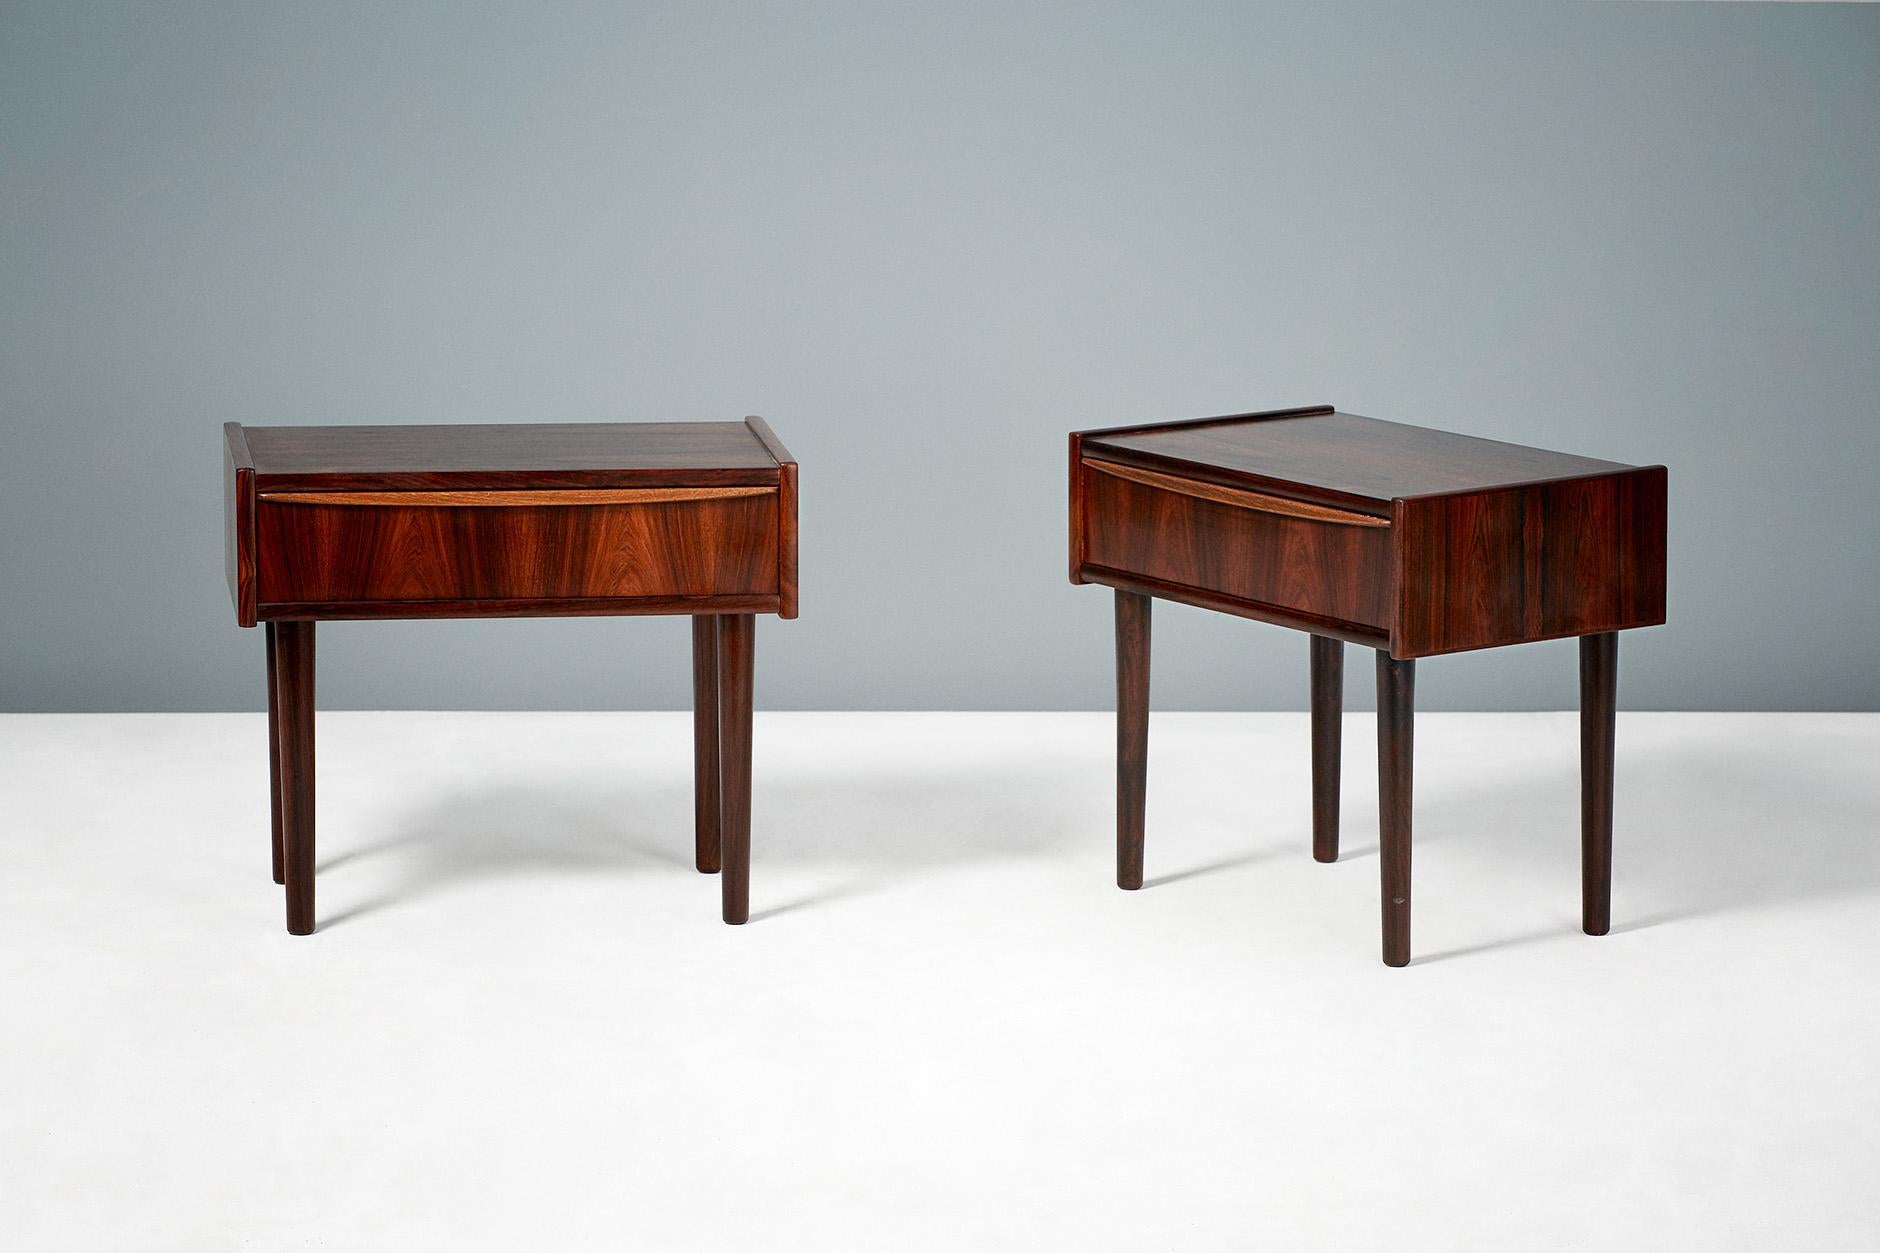 Danish cabinetmaker

Bedside cabinets, circa 1960.

Pair of rosewood bedside cabinets, produced in Denmark, circa 1960.